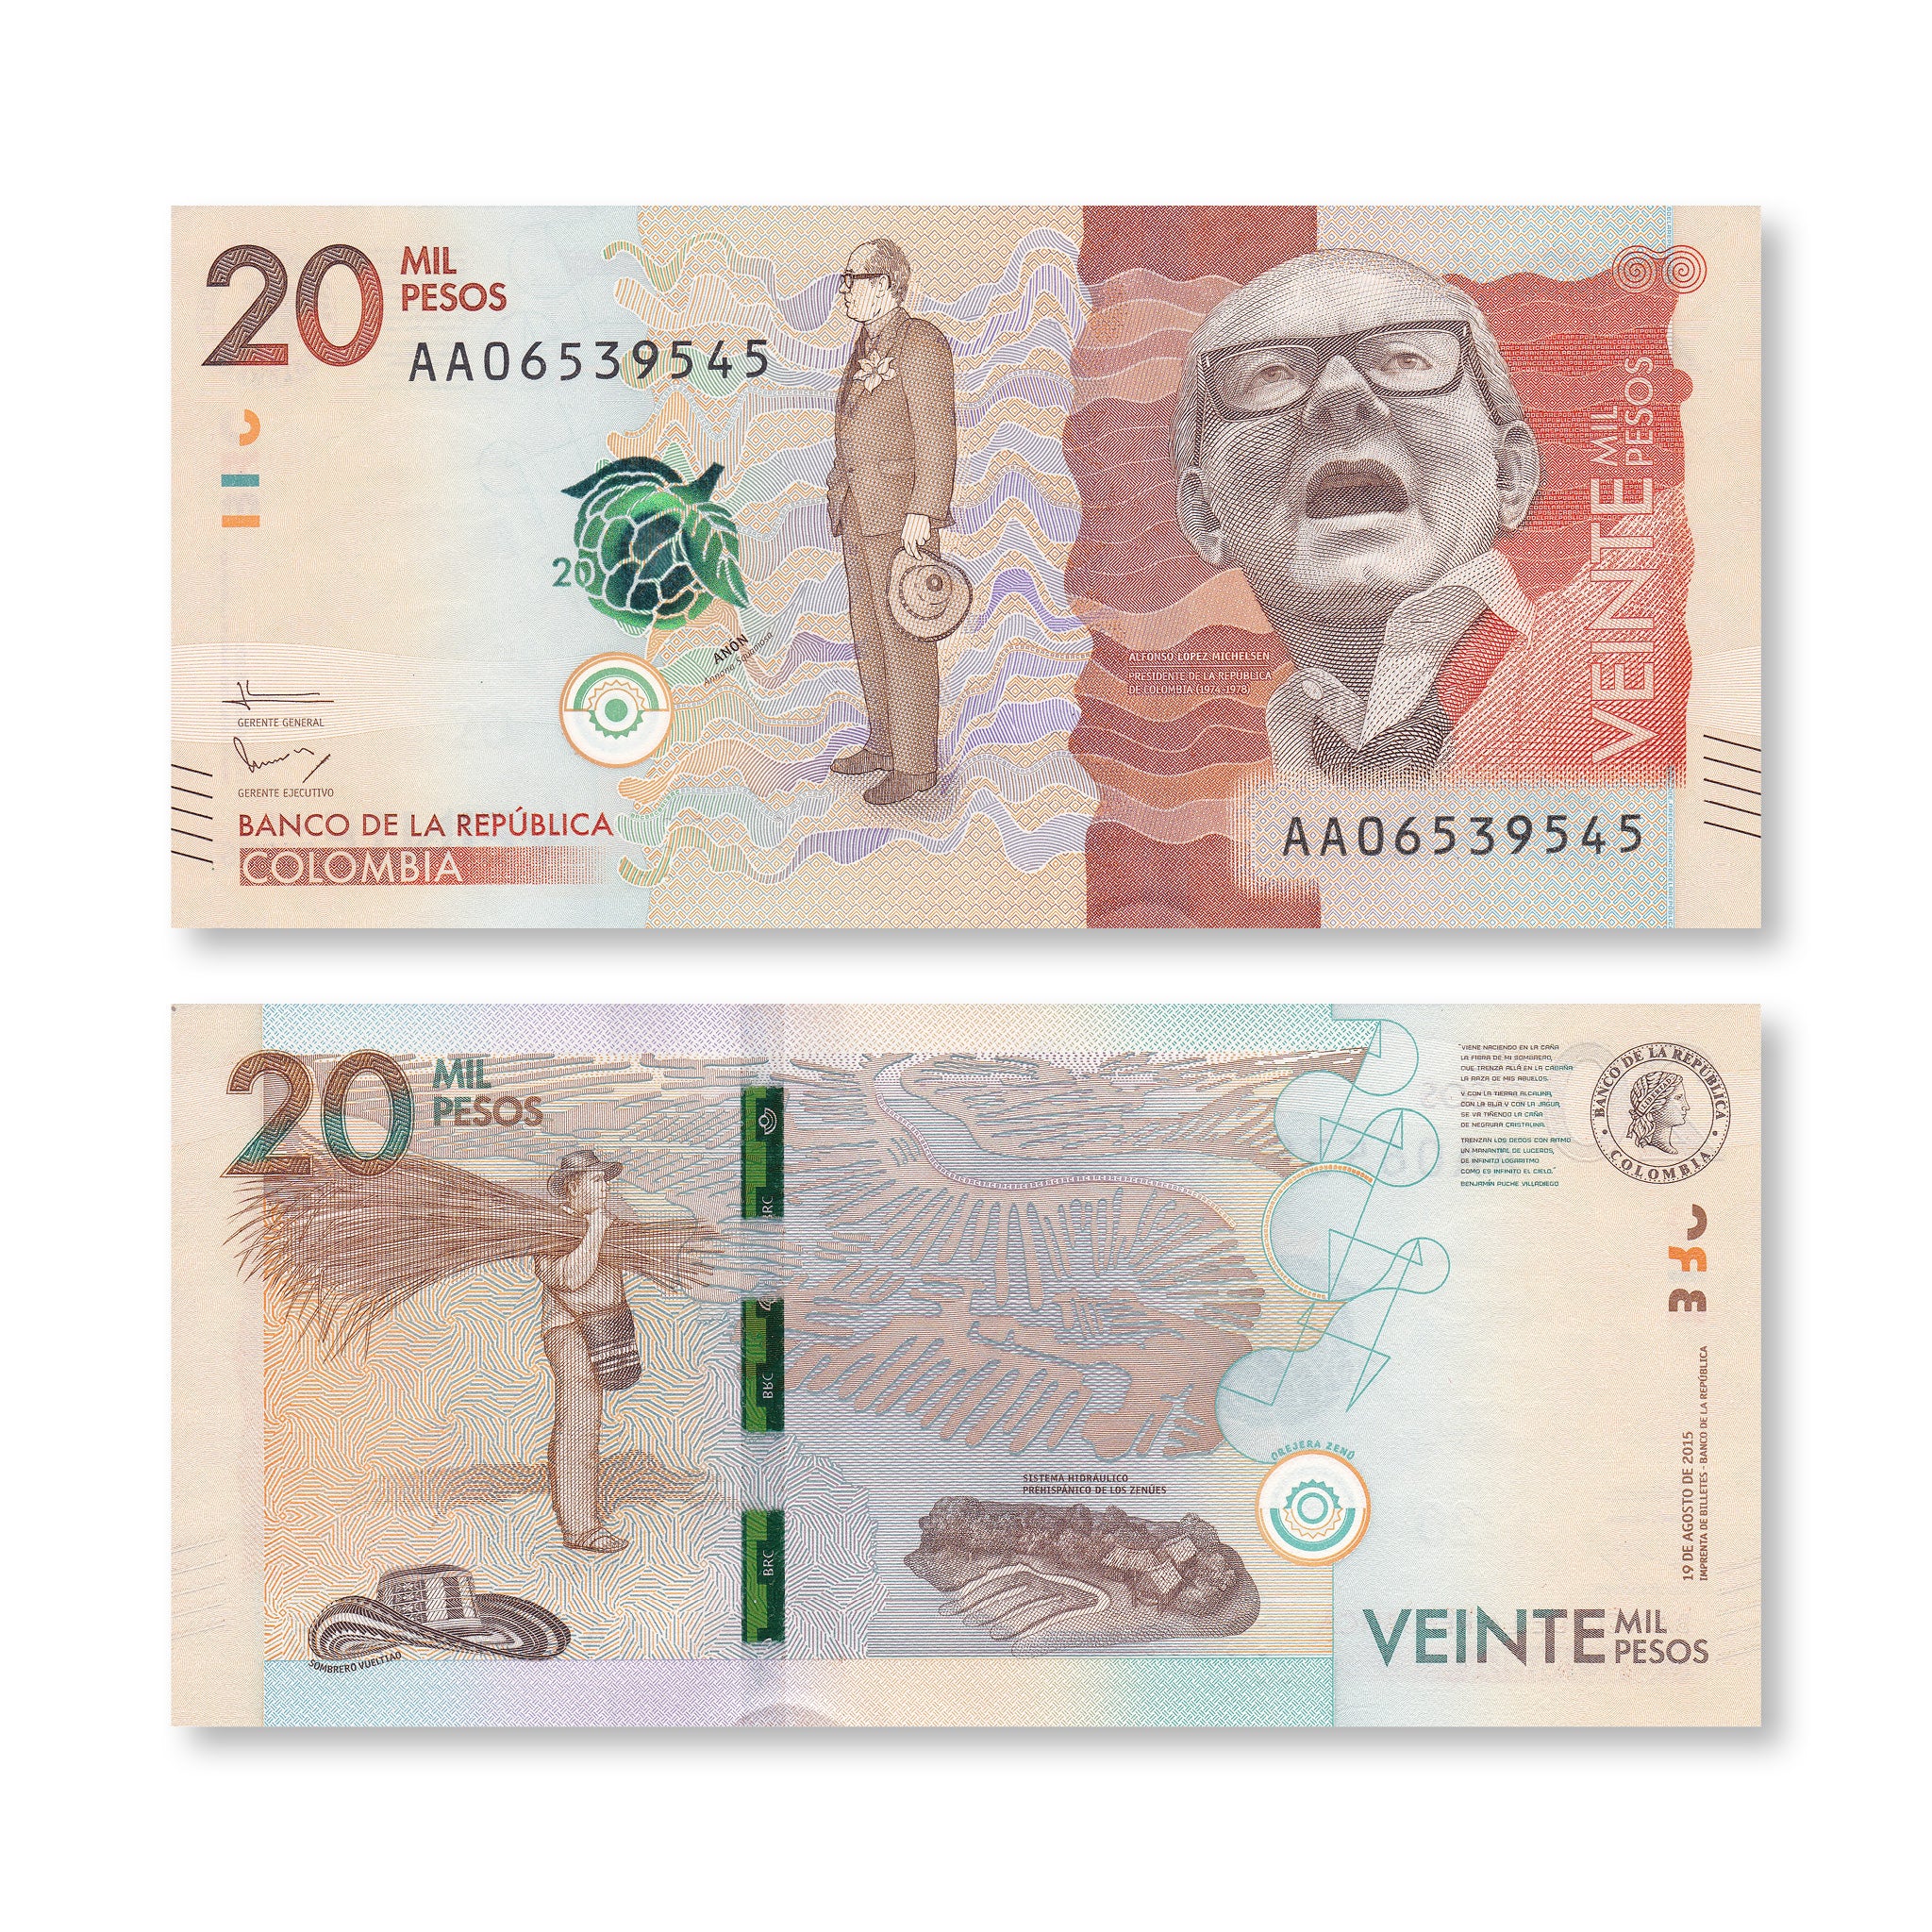 Colombia 20000 Pesos, 2015, B996a, P461a, UNC - Robert's World Money - World Banknotes